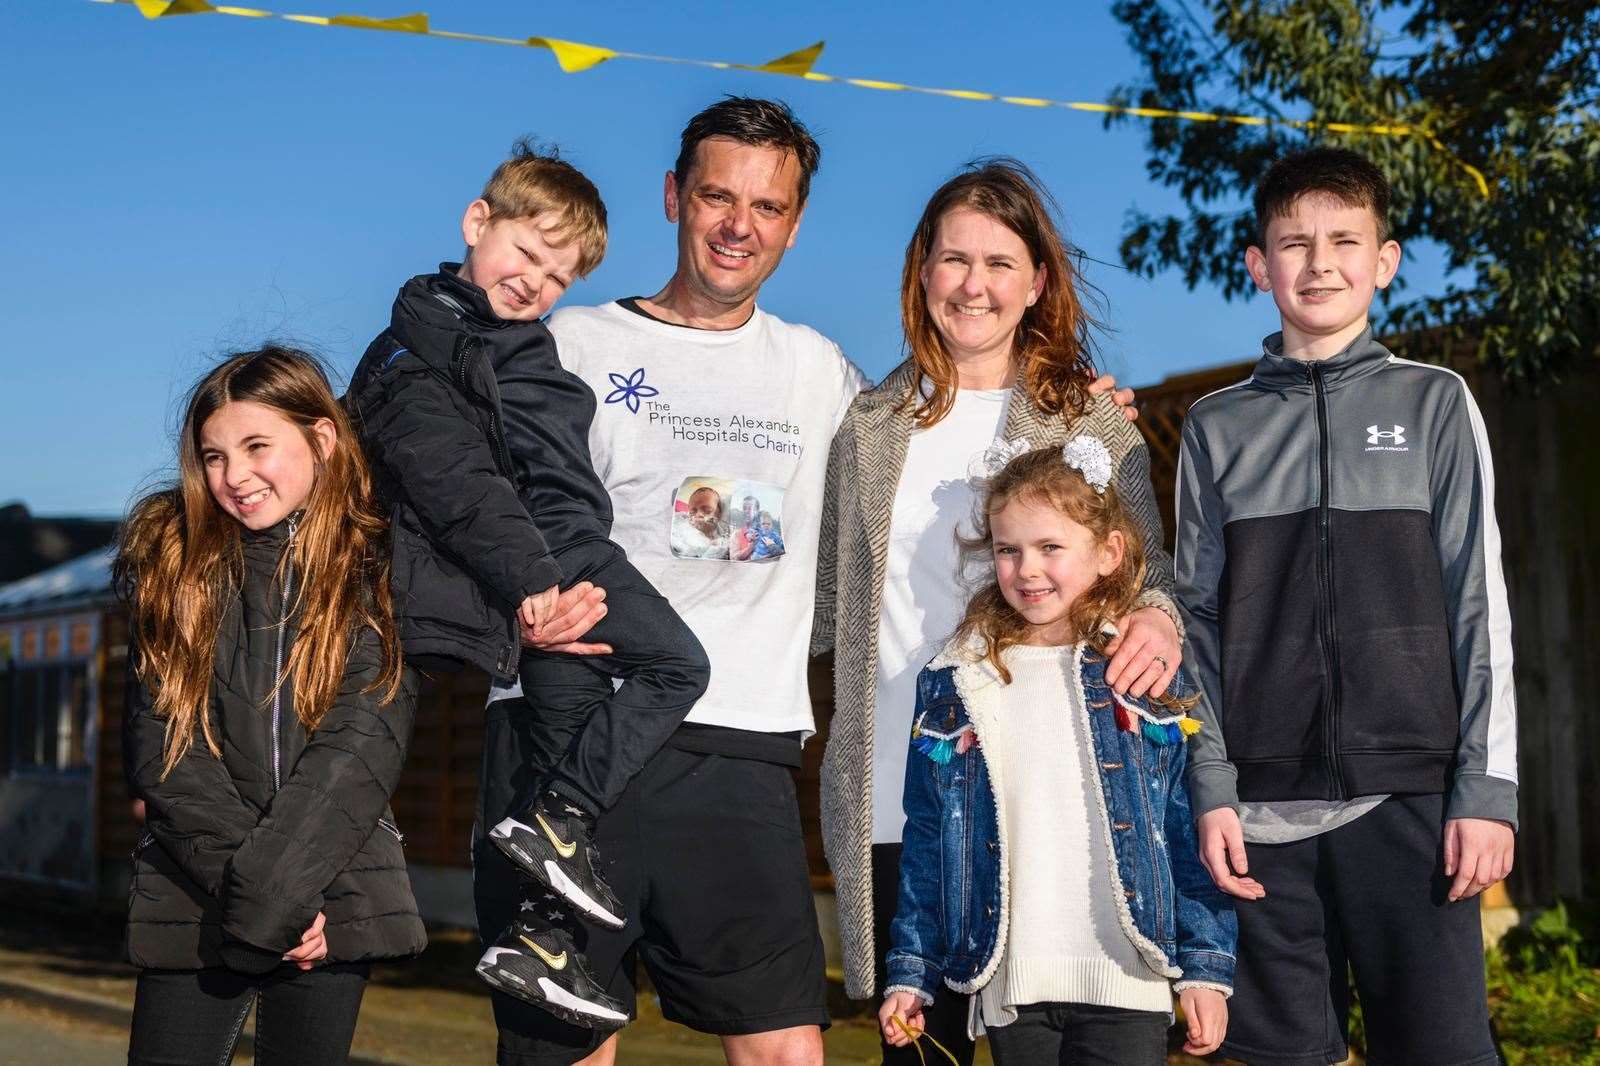 Marc, from Wilmington, near Dartford, with his wife Gemma and four children, Sidney, 13, Eliza, 10, Honor, 6, and Kit, 4. Picture: Marc Petters